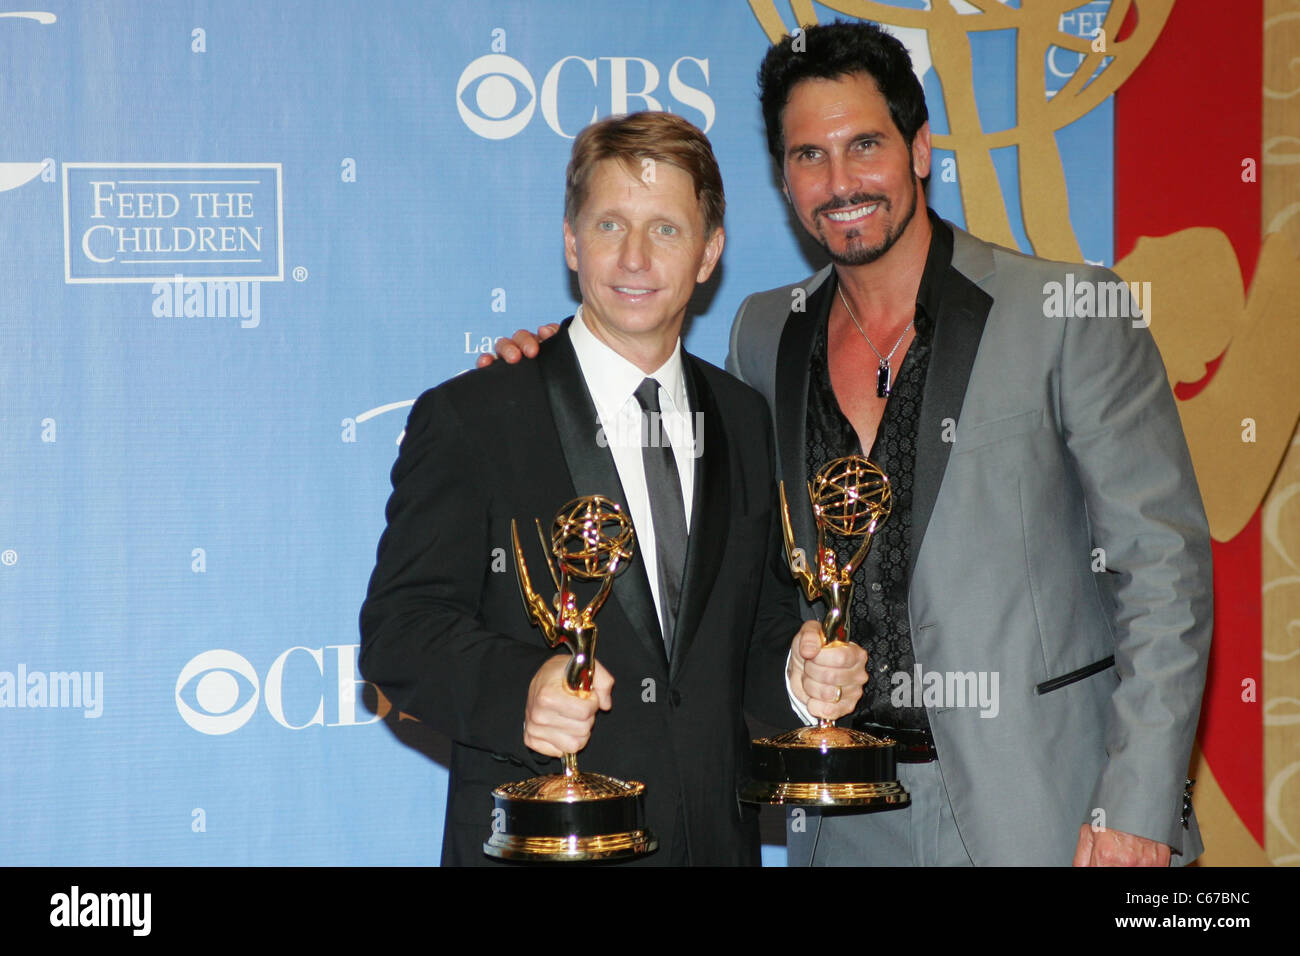 Bradley Bell, Don Diamont in the press room for 37th Annual Daytime Entertainment Emmy Awards - PRESS ROOM, Las Vegas Hilton, Las Vegas, NV June 27, 2010. Photo By: James Atoa/Everett Collection Stock Photo